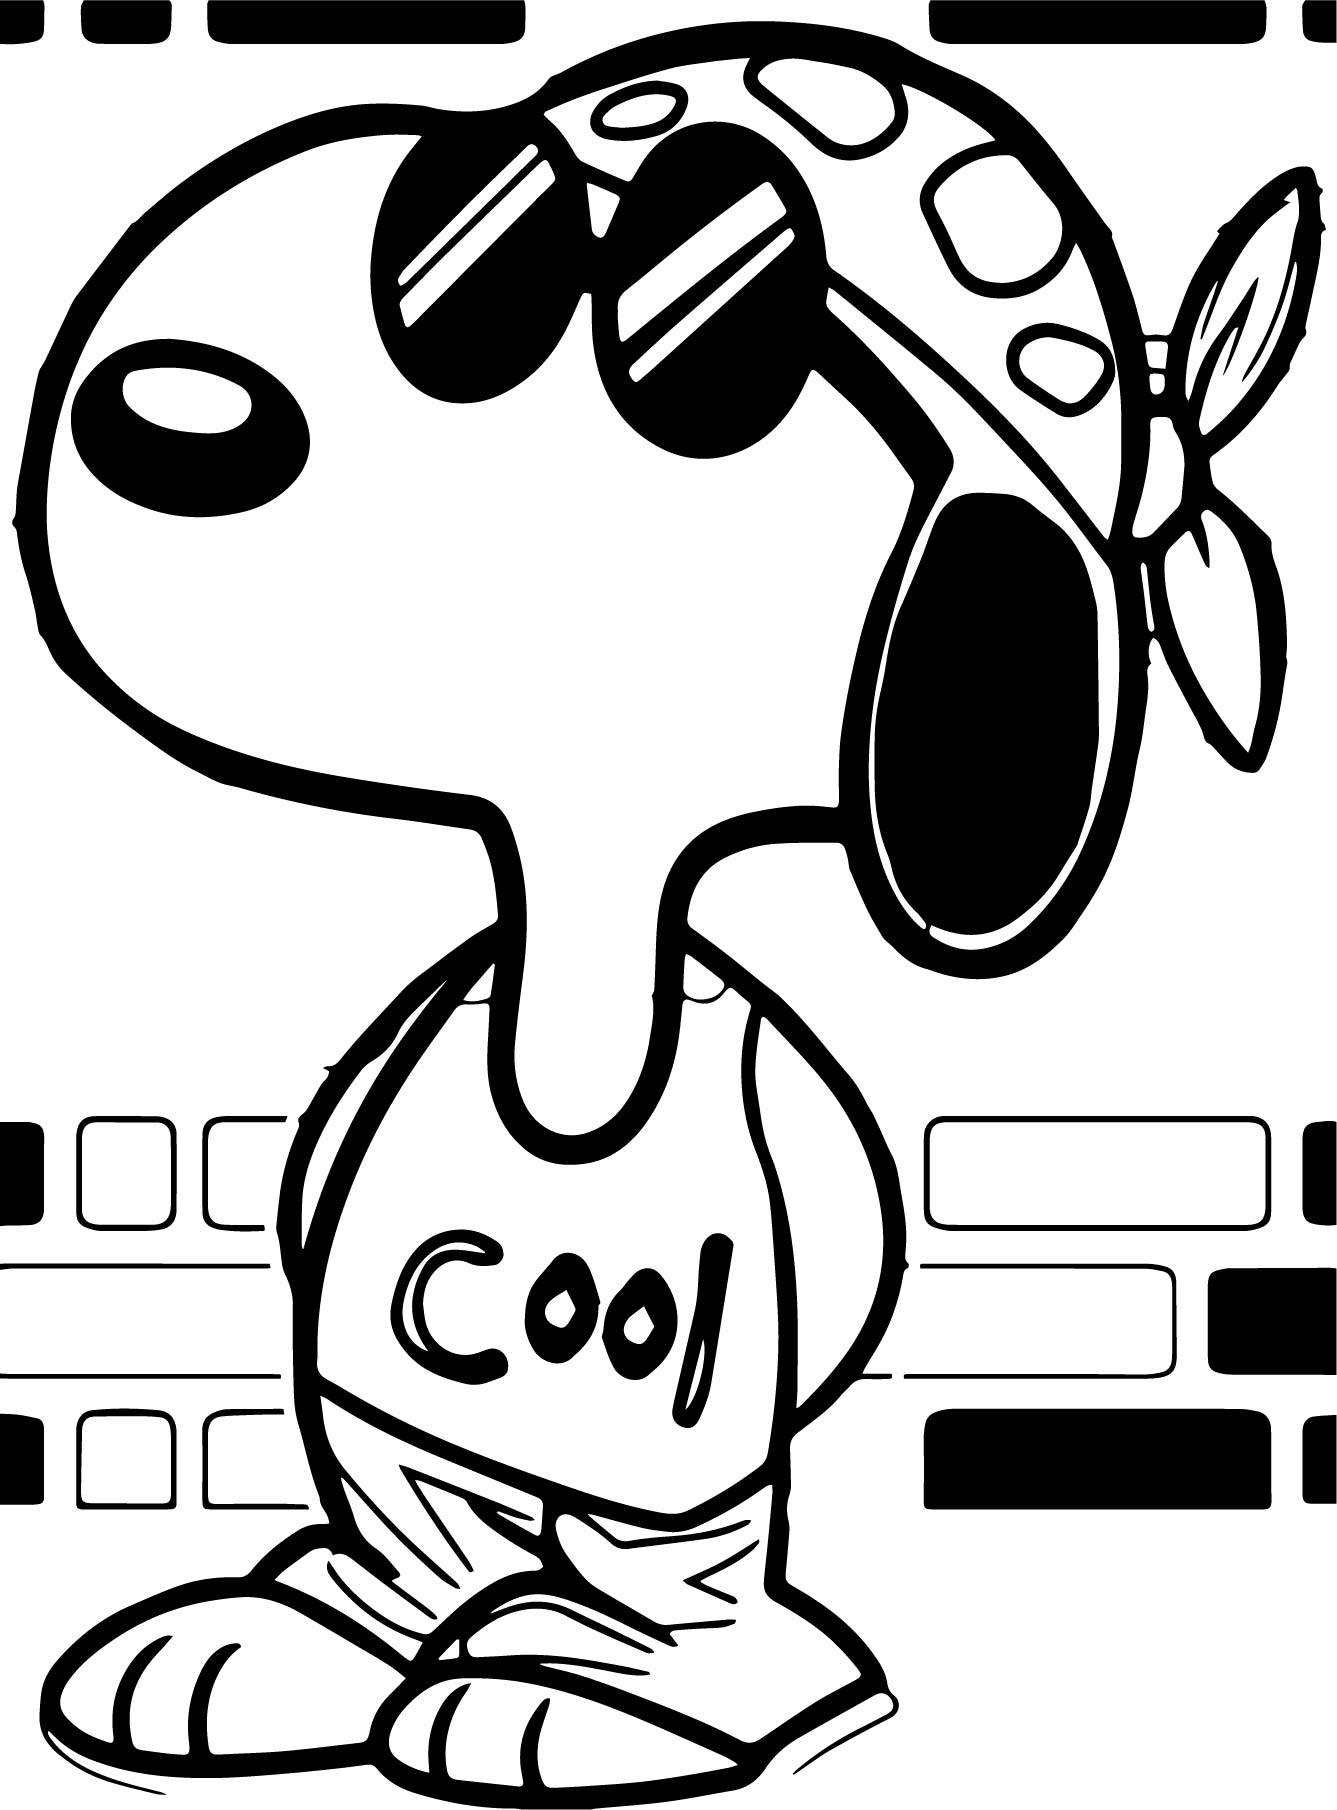 Snoopy Coolest Style Coloring Page Free Printable Coloring Pages for Kids